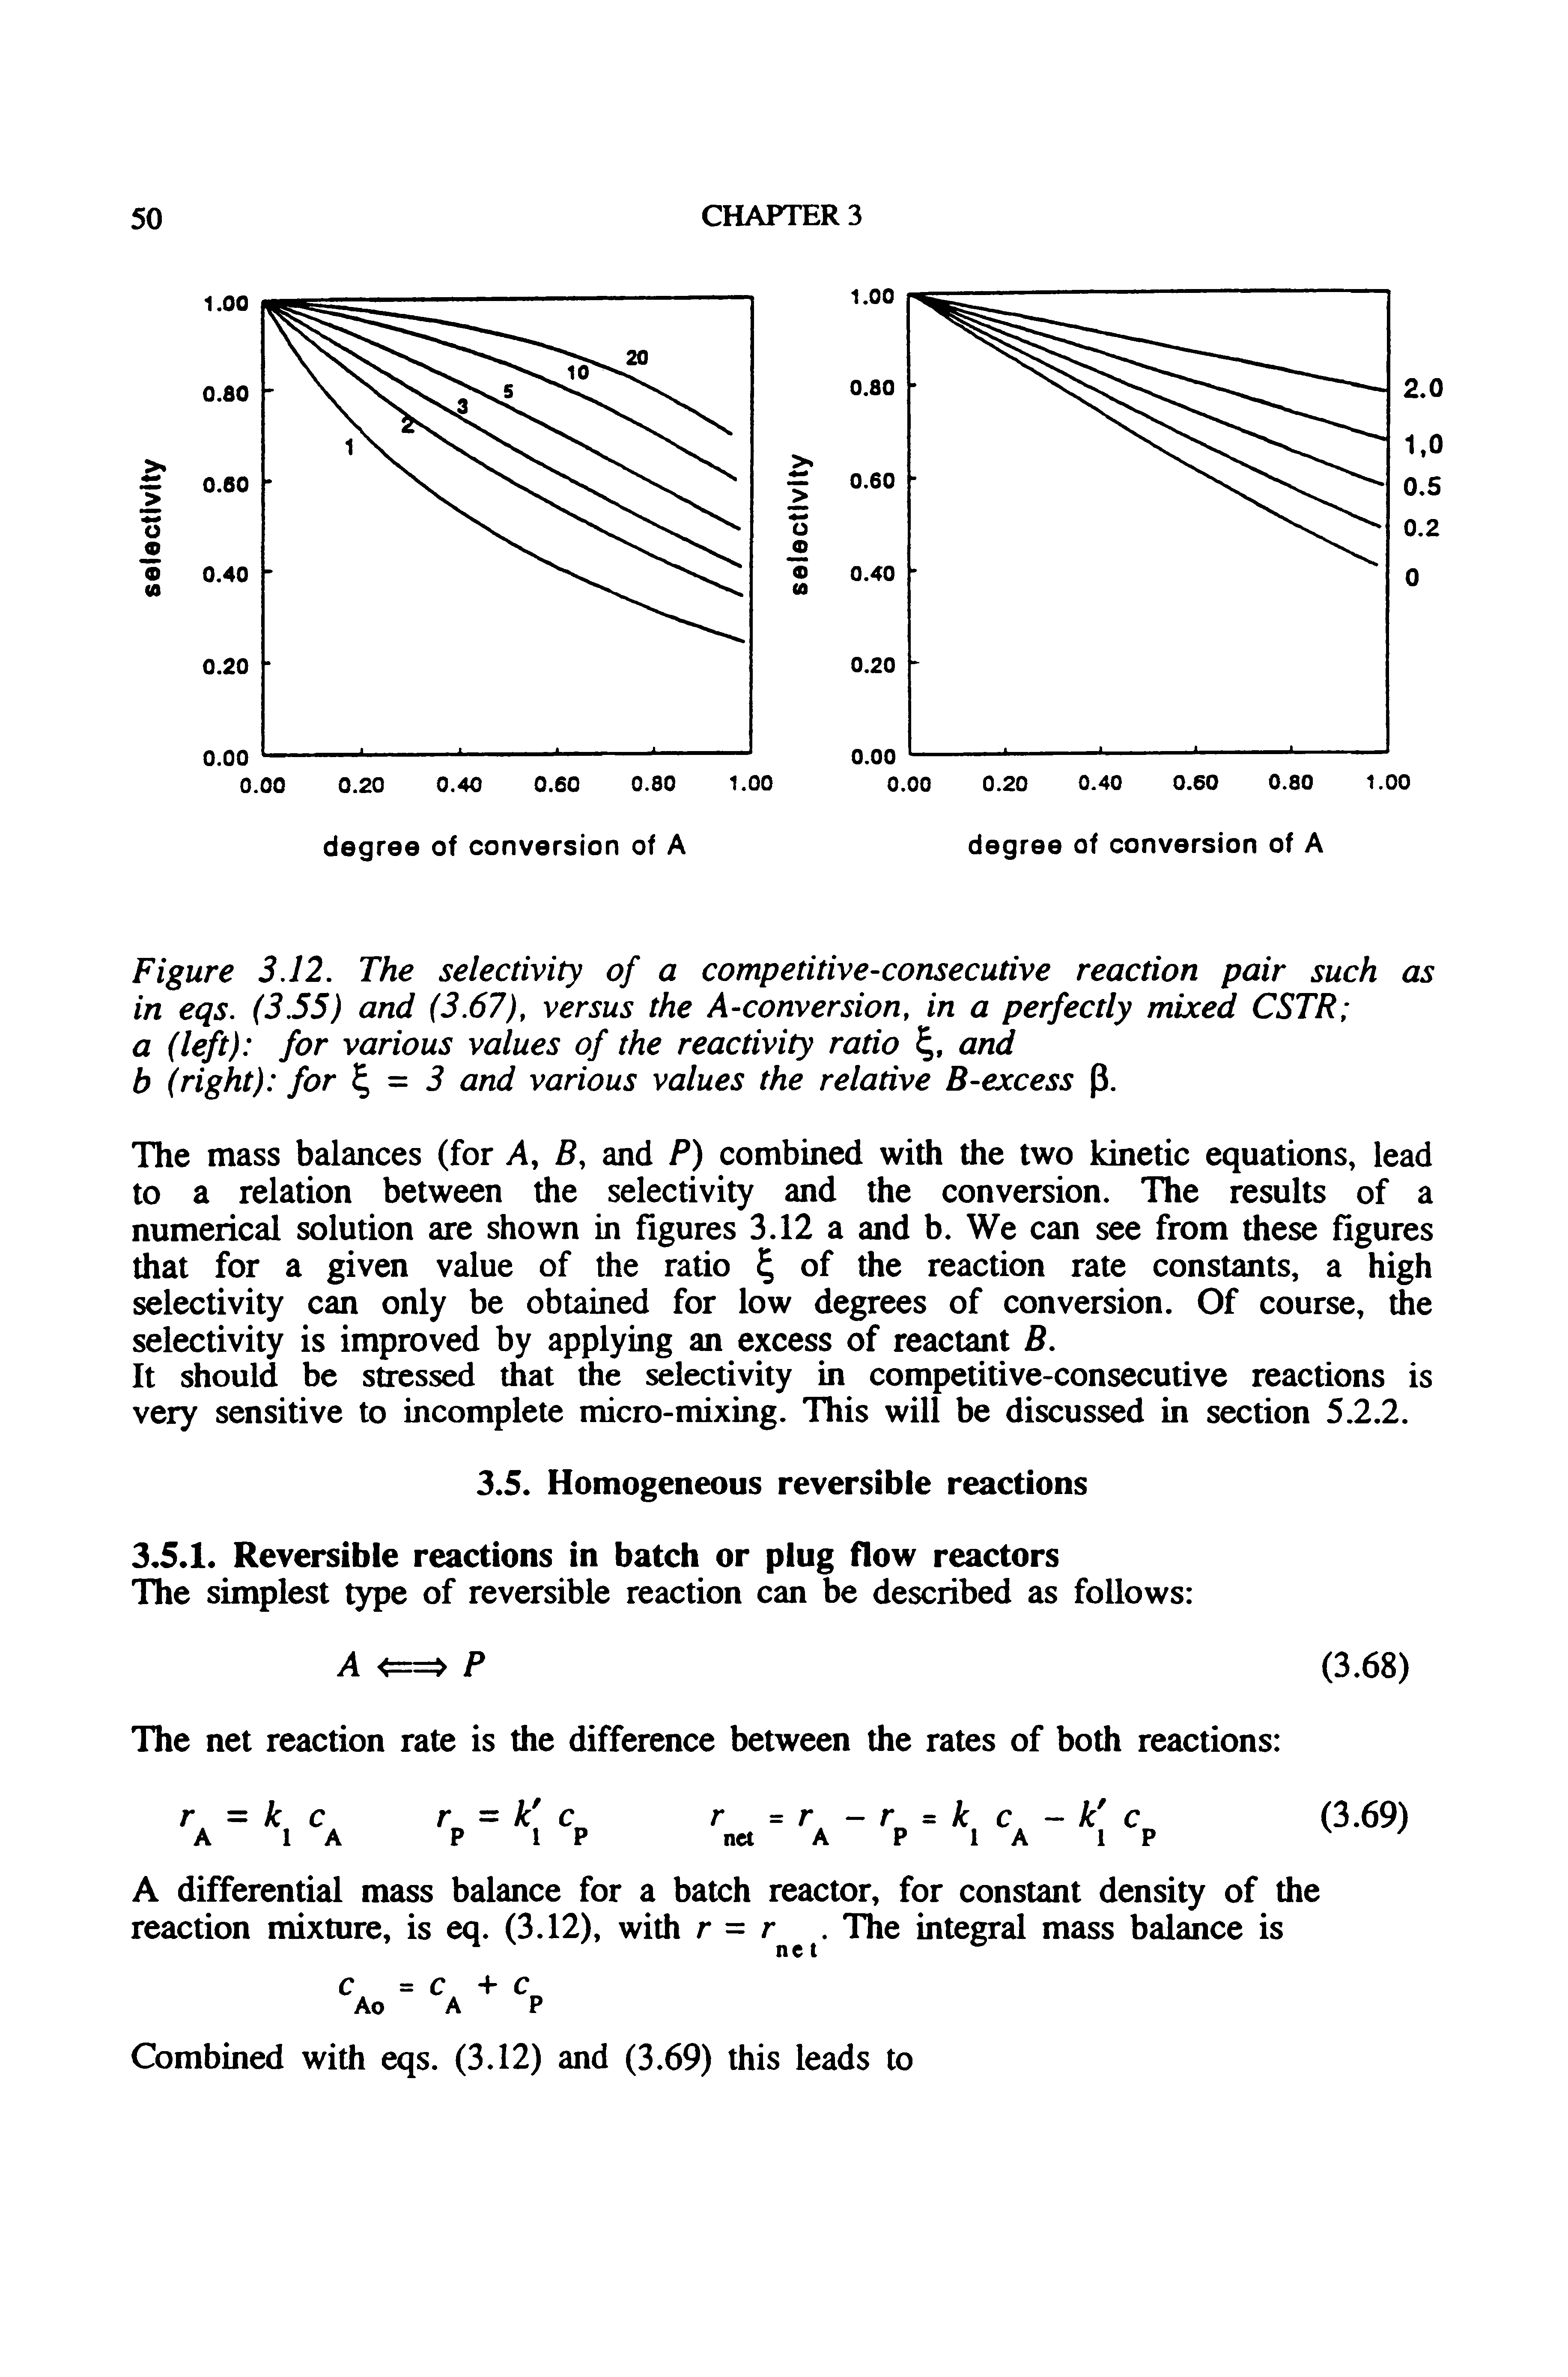 Figure 3J2. The selectivity of a competitive-consecutive reaction pair such as in eqs. (355) and (3.67), versus the A-conversion, in a perfectly mixed CSTR a (left) for various values of the reactivity ratio and b (right) for = i and various values the relative B-excess p.